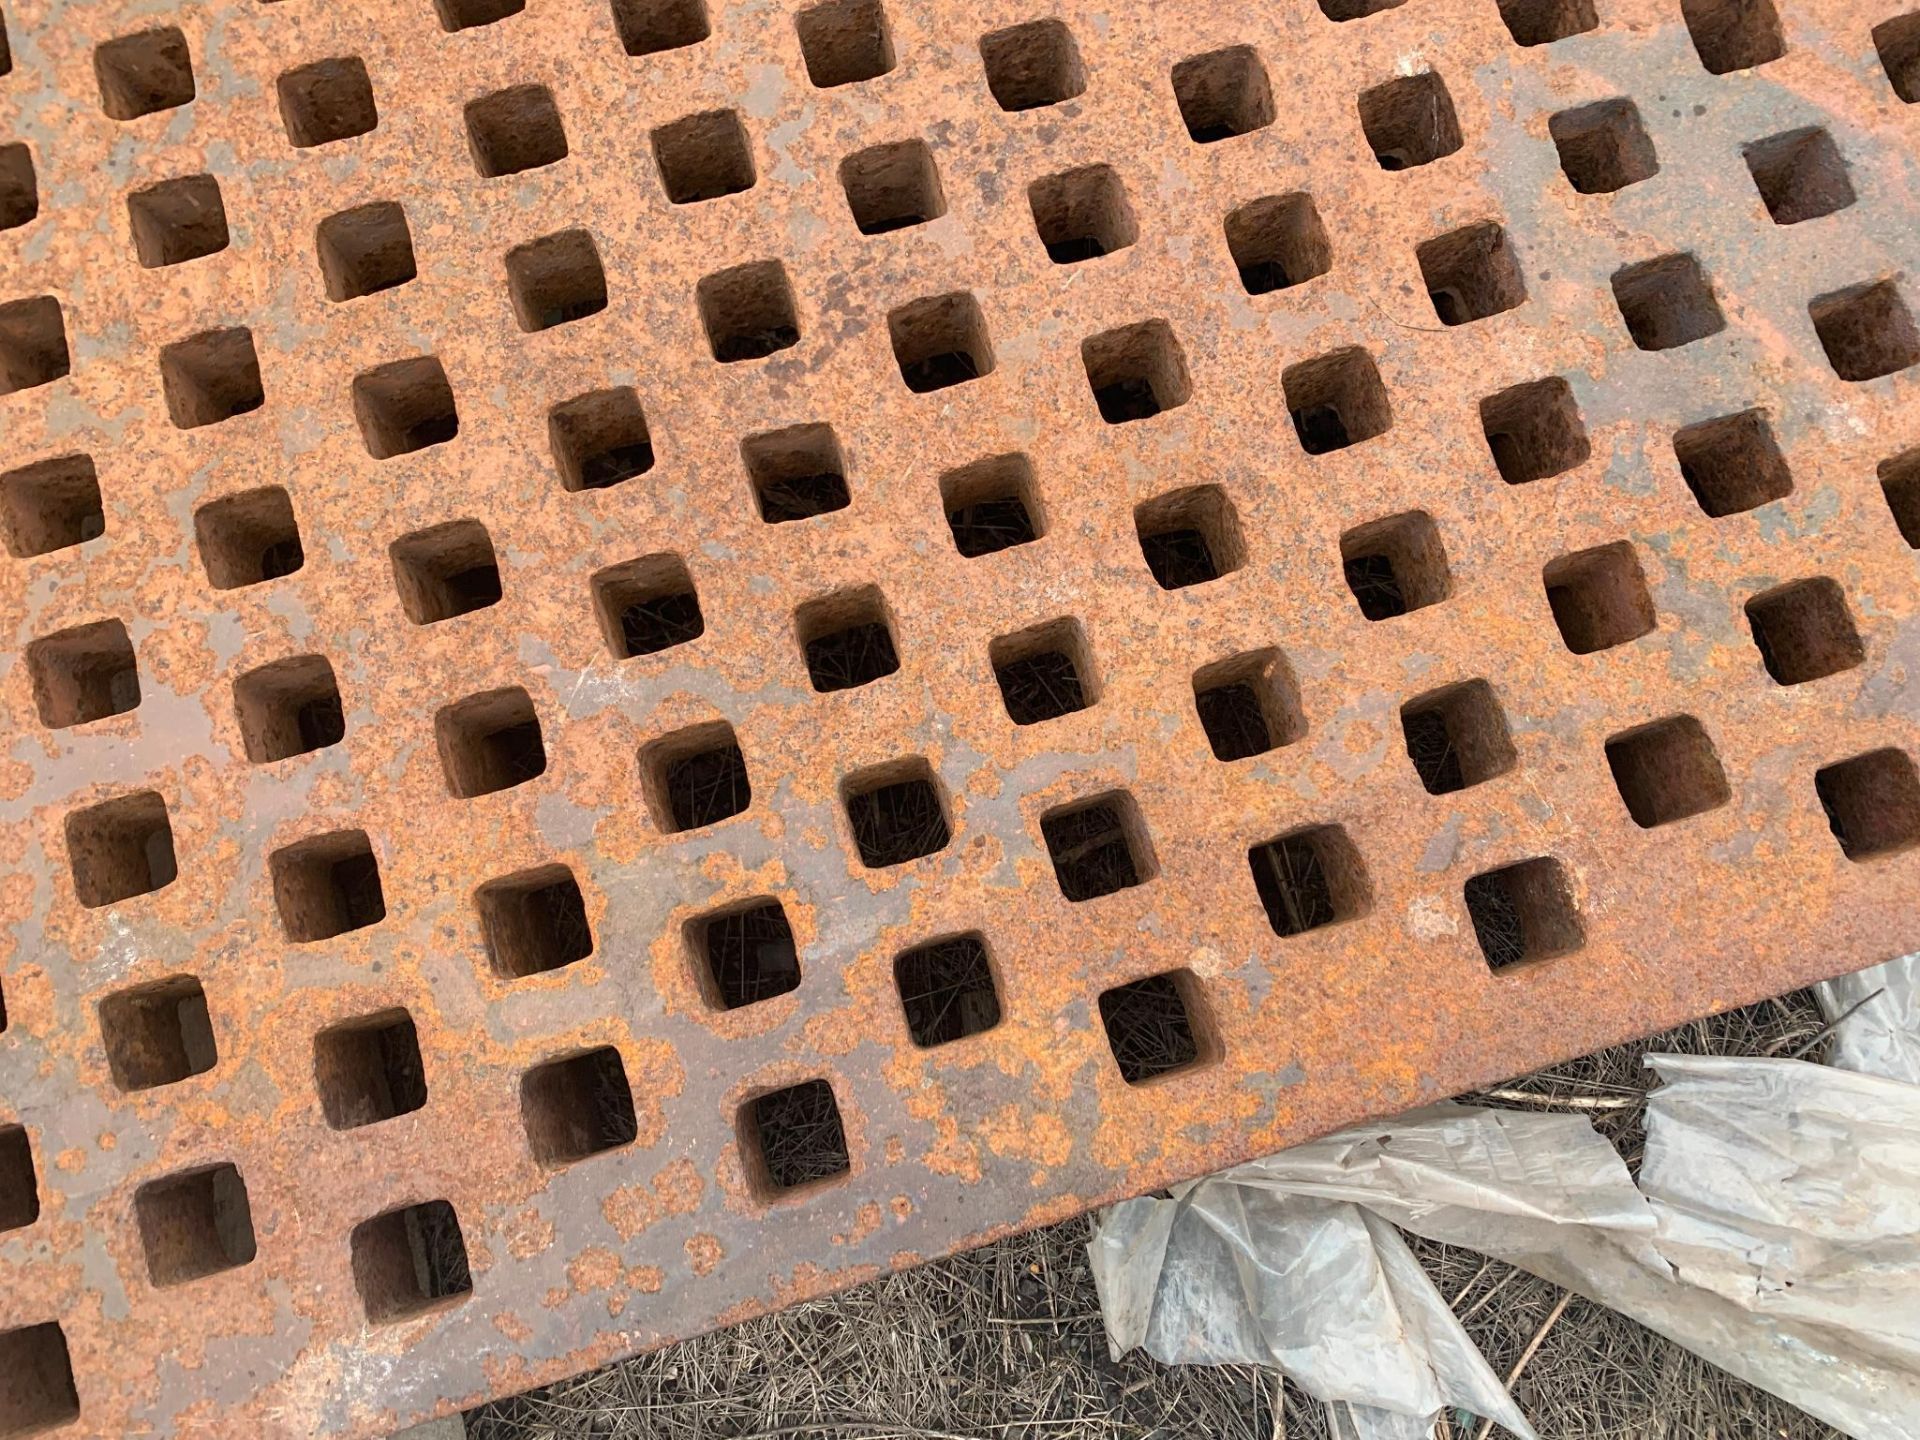 Acorn Style Welding Platen. Approx 61.5" x 61.5" x 5.25" deep with 2" square holes. Note: Small crac - Image 16 of 33